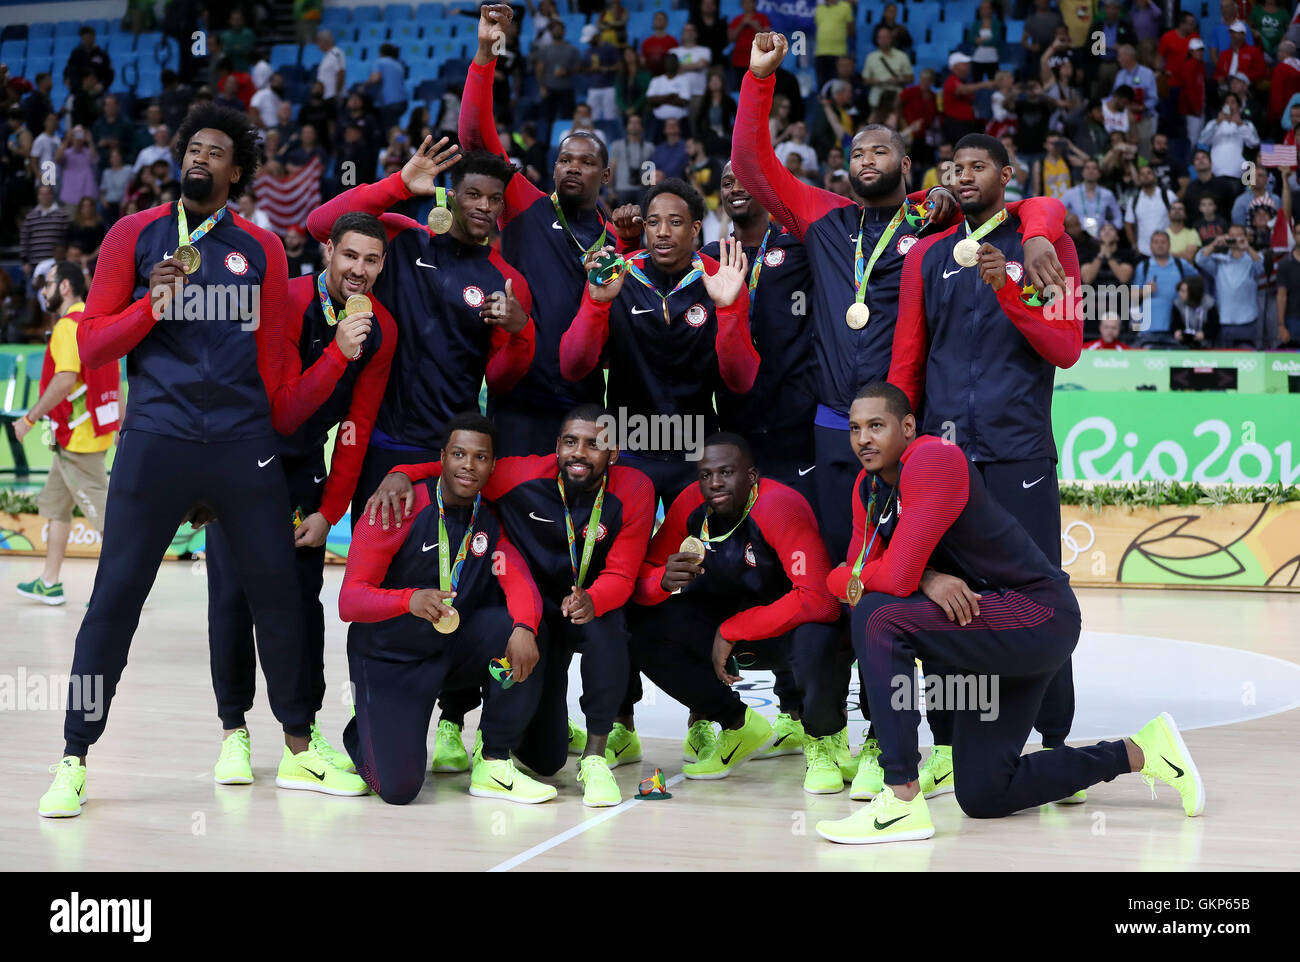 Rio De Janeiro Rj 21 08 16 Rio 16 Olympics Basketball Us Players Celebrate The Gold Medal After The Match Between The Usa And Serbia Basketball Rio 16 Olympics Held In Arena